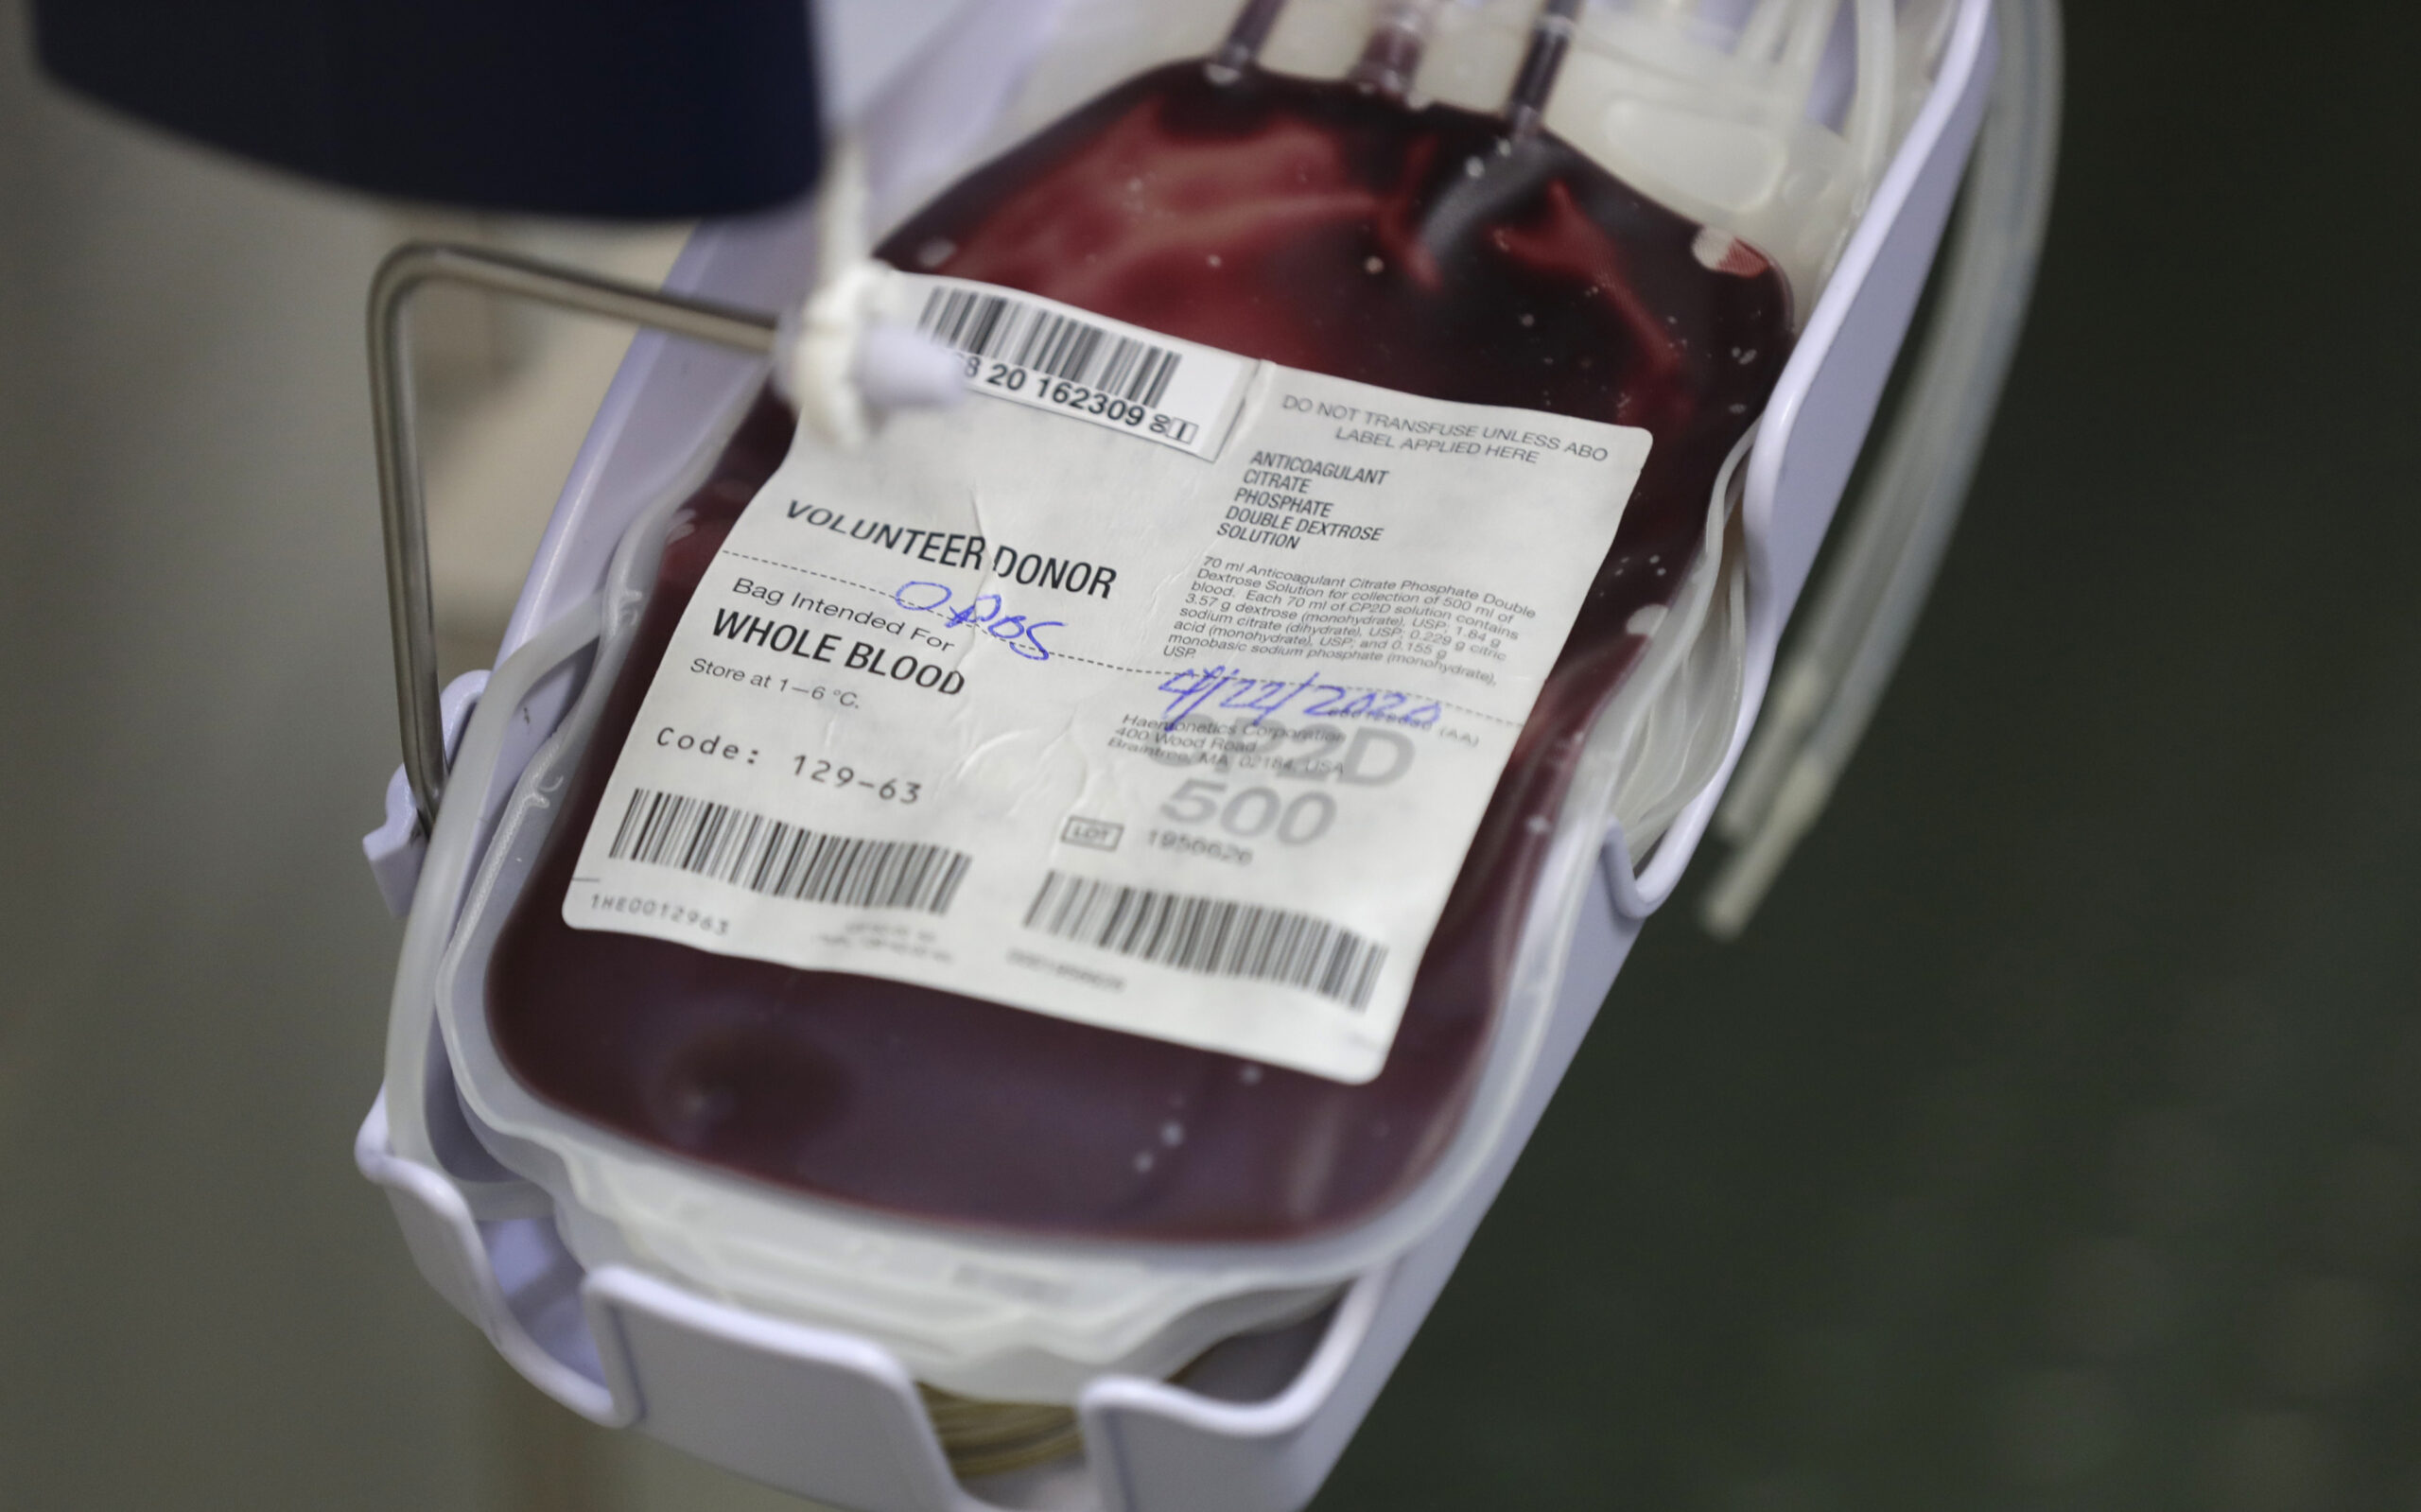 Blood donation groups ask Wisconsinites to find time to donate during the holidays